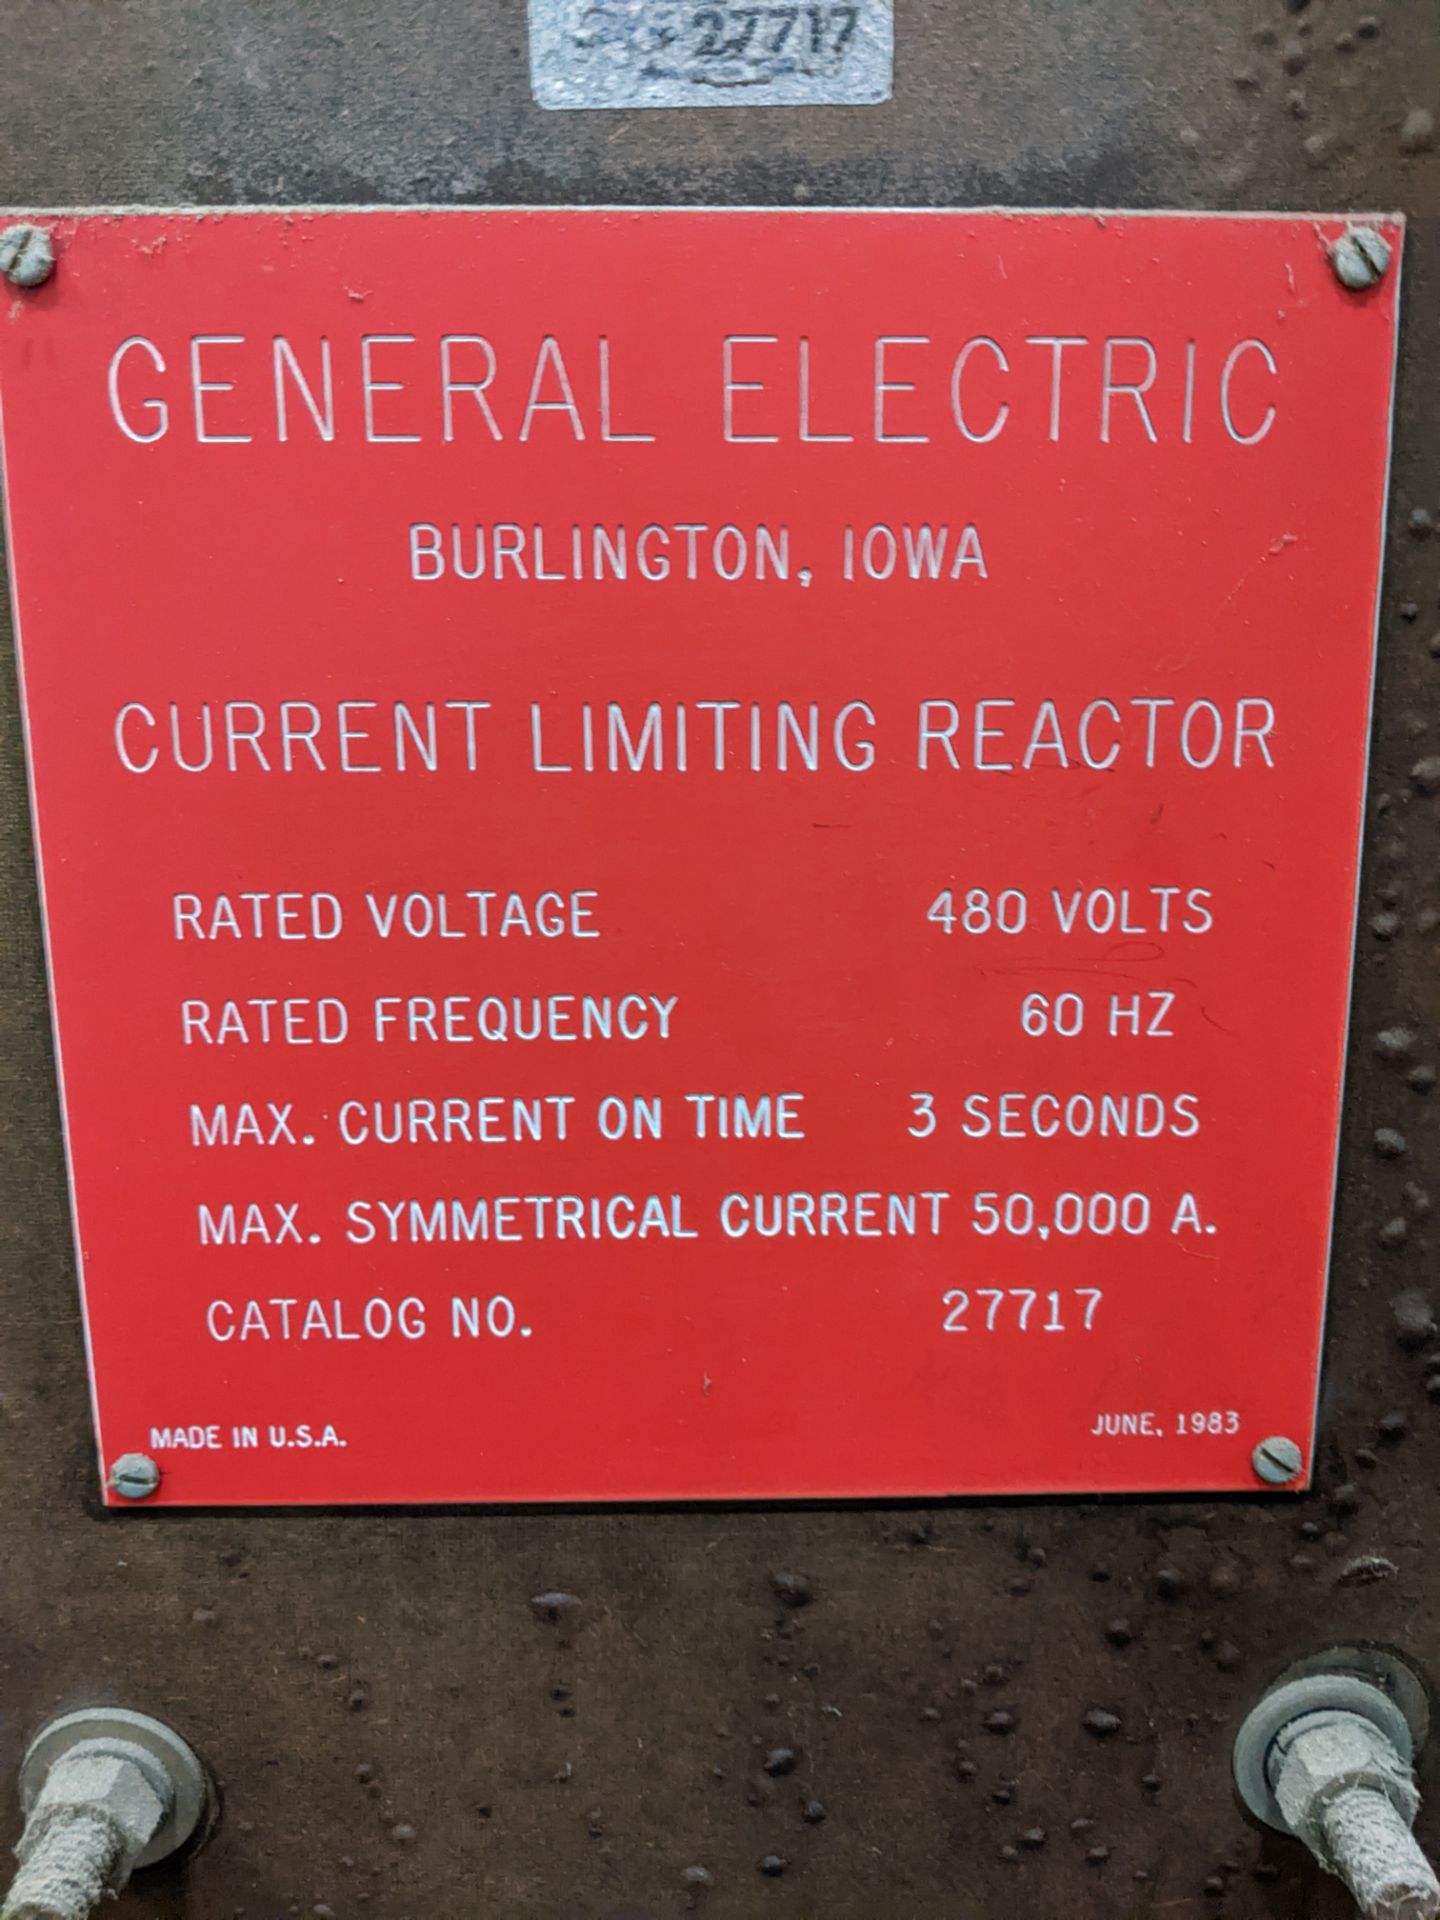 SOUTHERN TRANSFORMER CO. SINGLE-PHASE TRANSFORMER; 2:000 KVA; TYPE AA NO. T6749 WITH LIMITING - Image 2 of 5